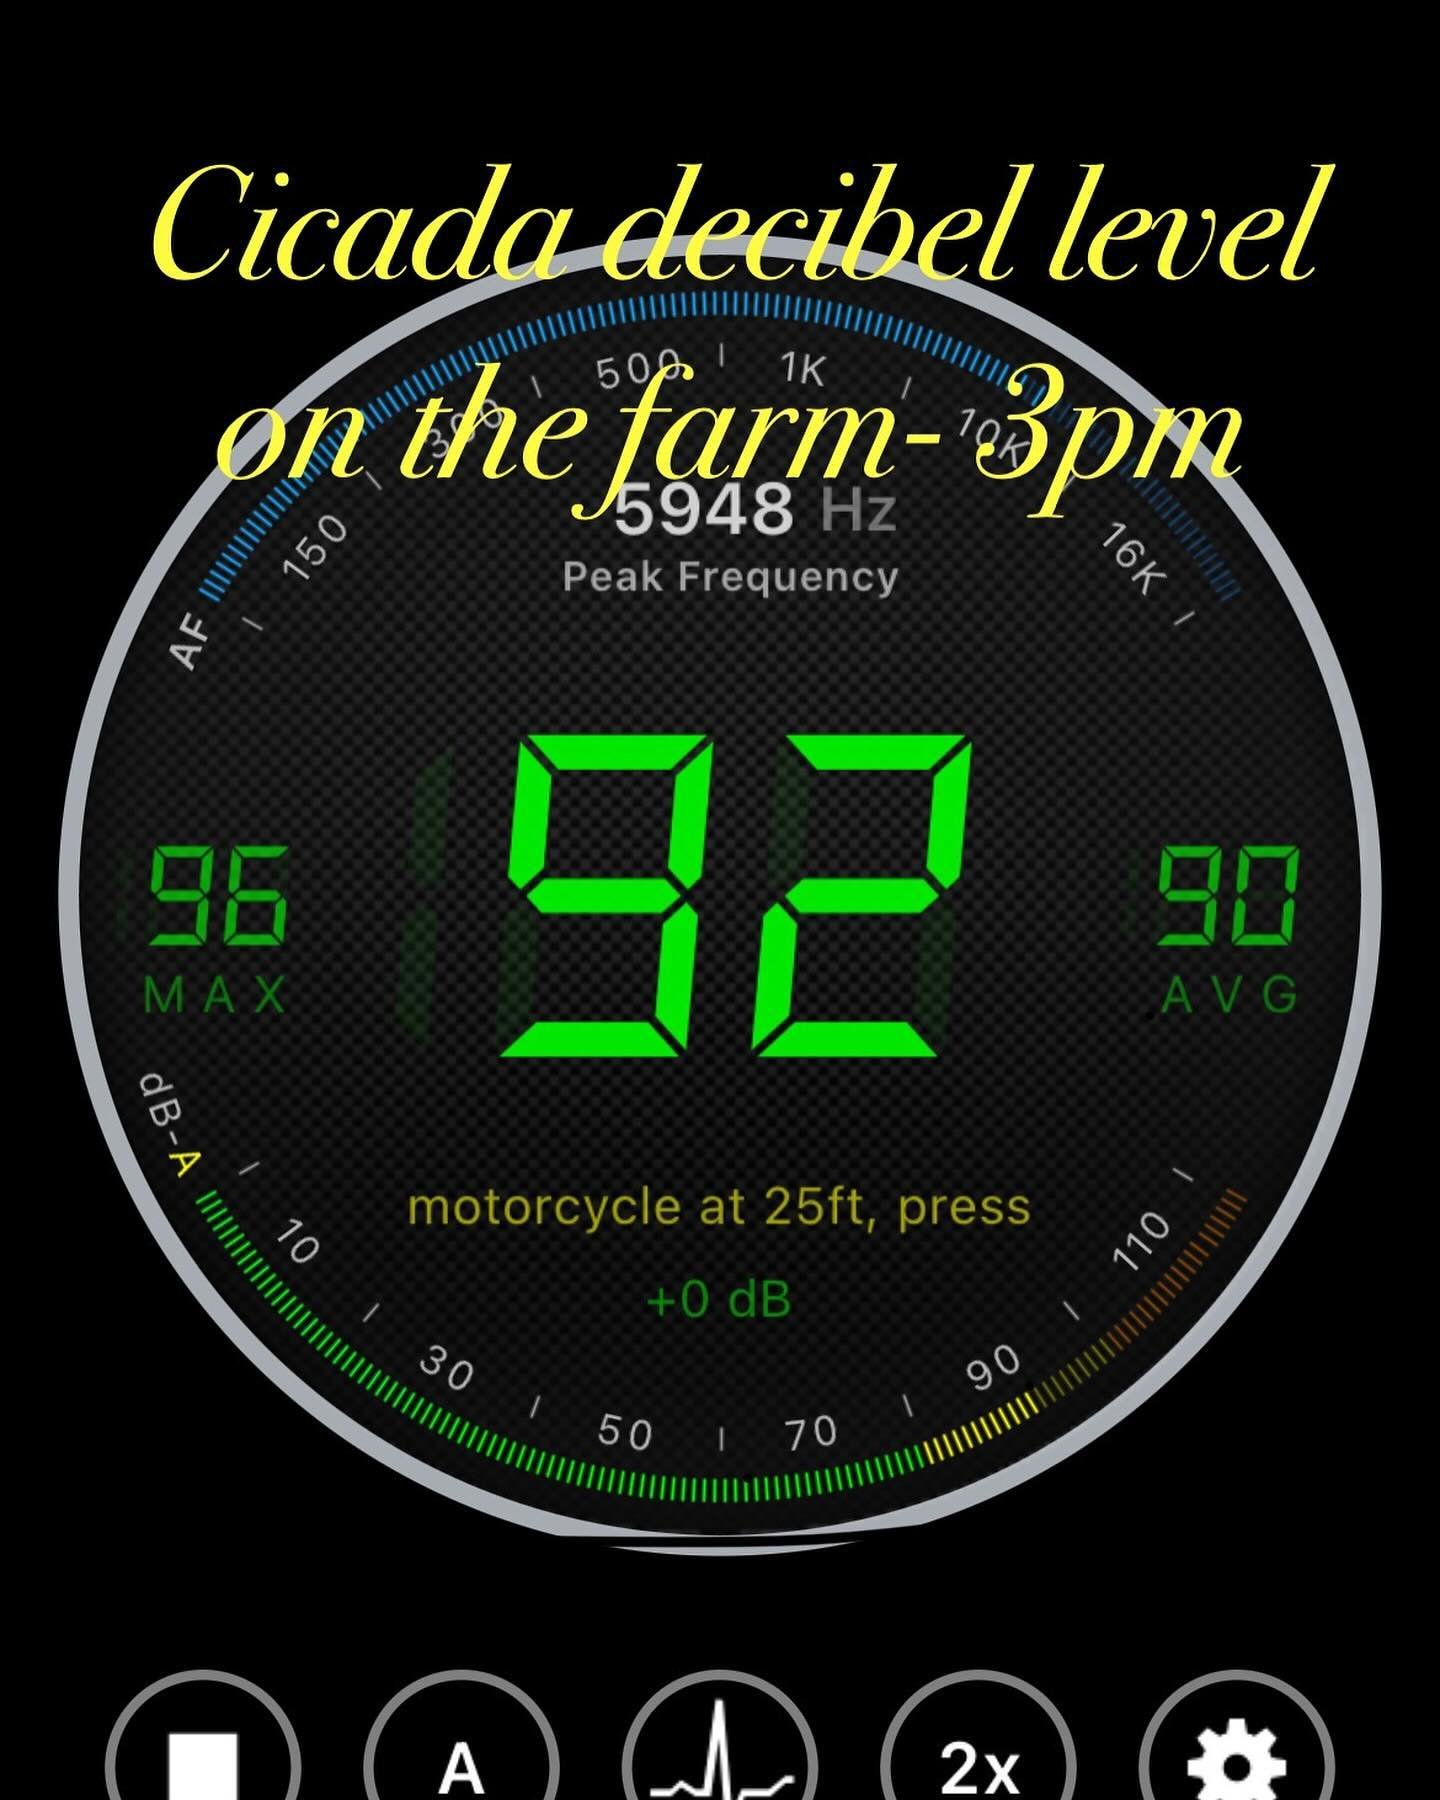 It&rsquo;s loud here, folks, this decibel meter on my phone says the ambient cicada levels are north of 90dB, and peaking at 96 in the late afternoon!  It builds all day, but the farm store will be open tomorrow morning with our all natural pork and 